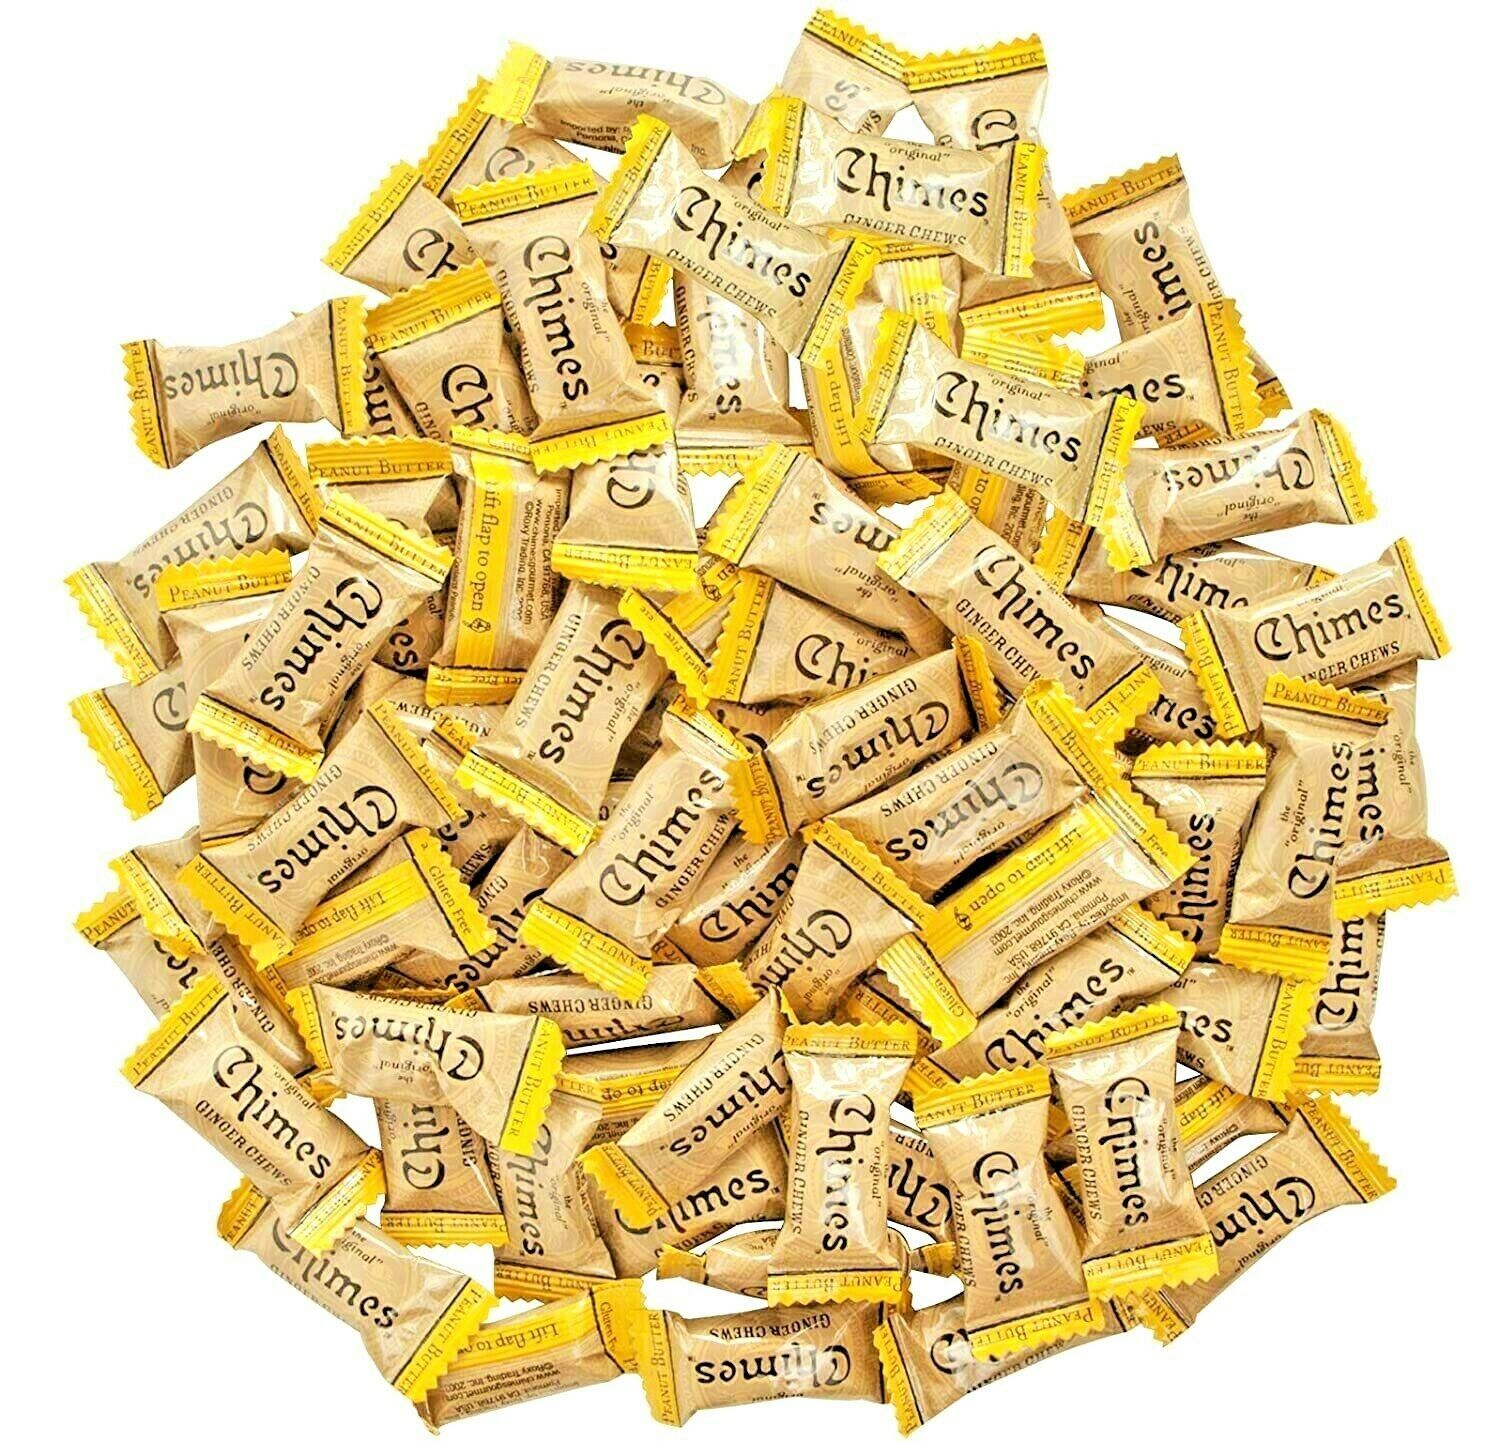 Chimes Peanut Butter Ginger Chews Candy, 1-Pound Bag